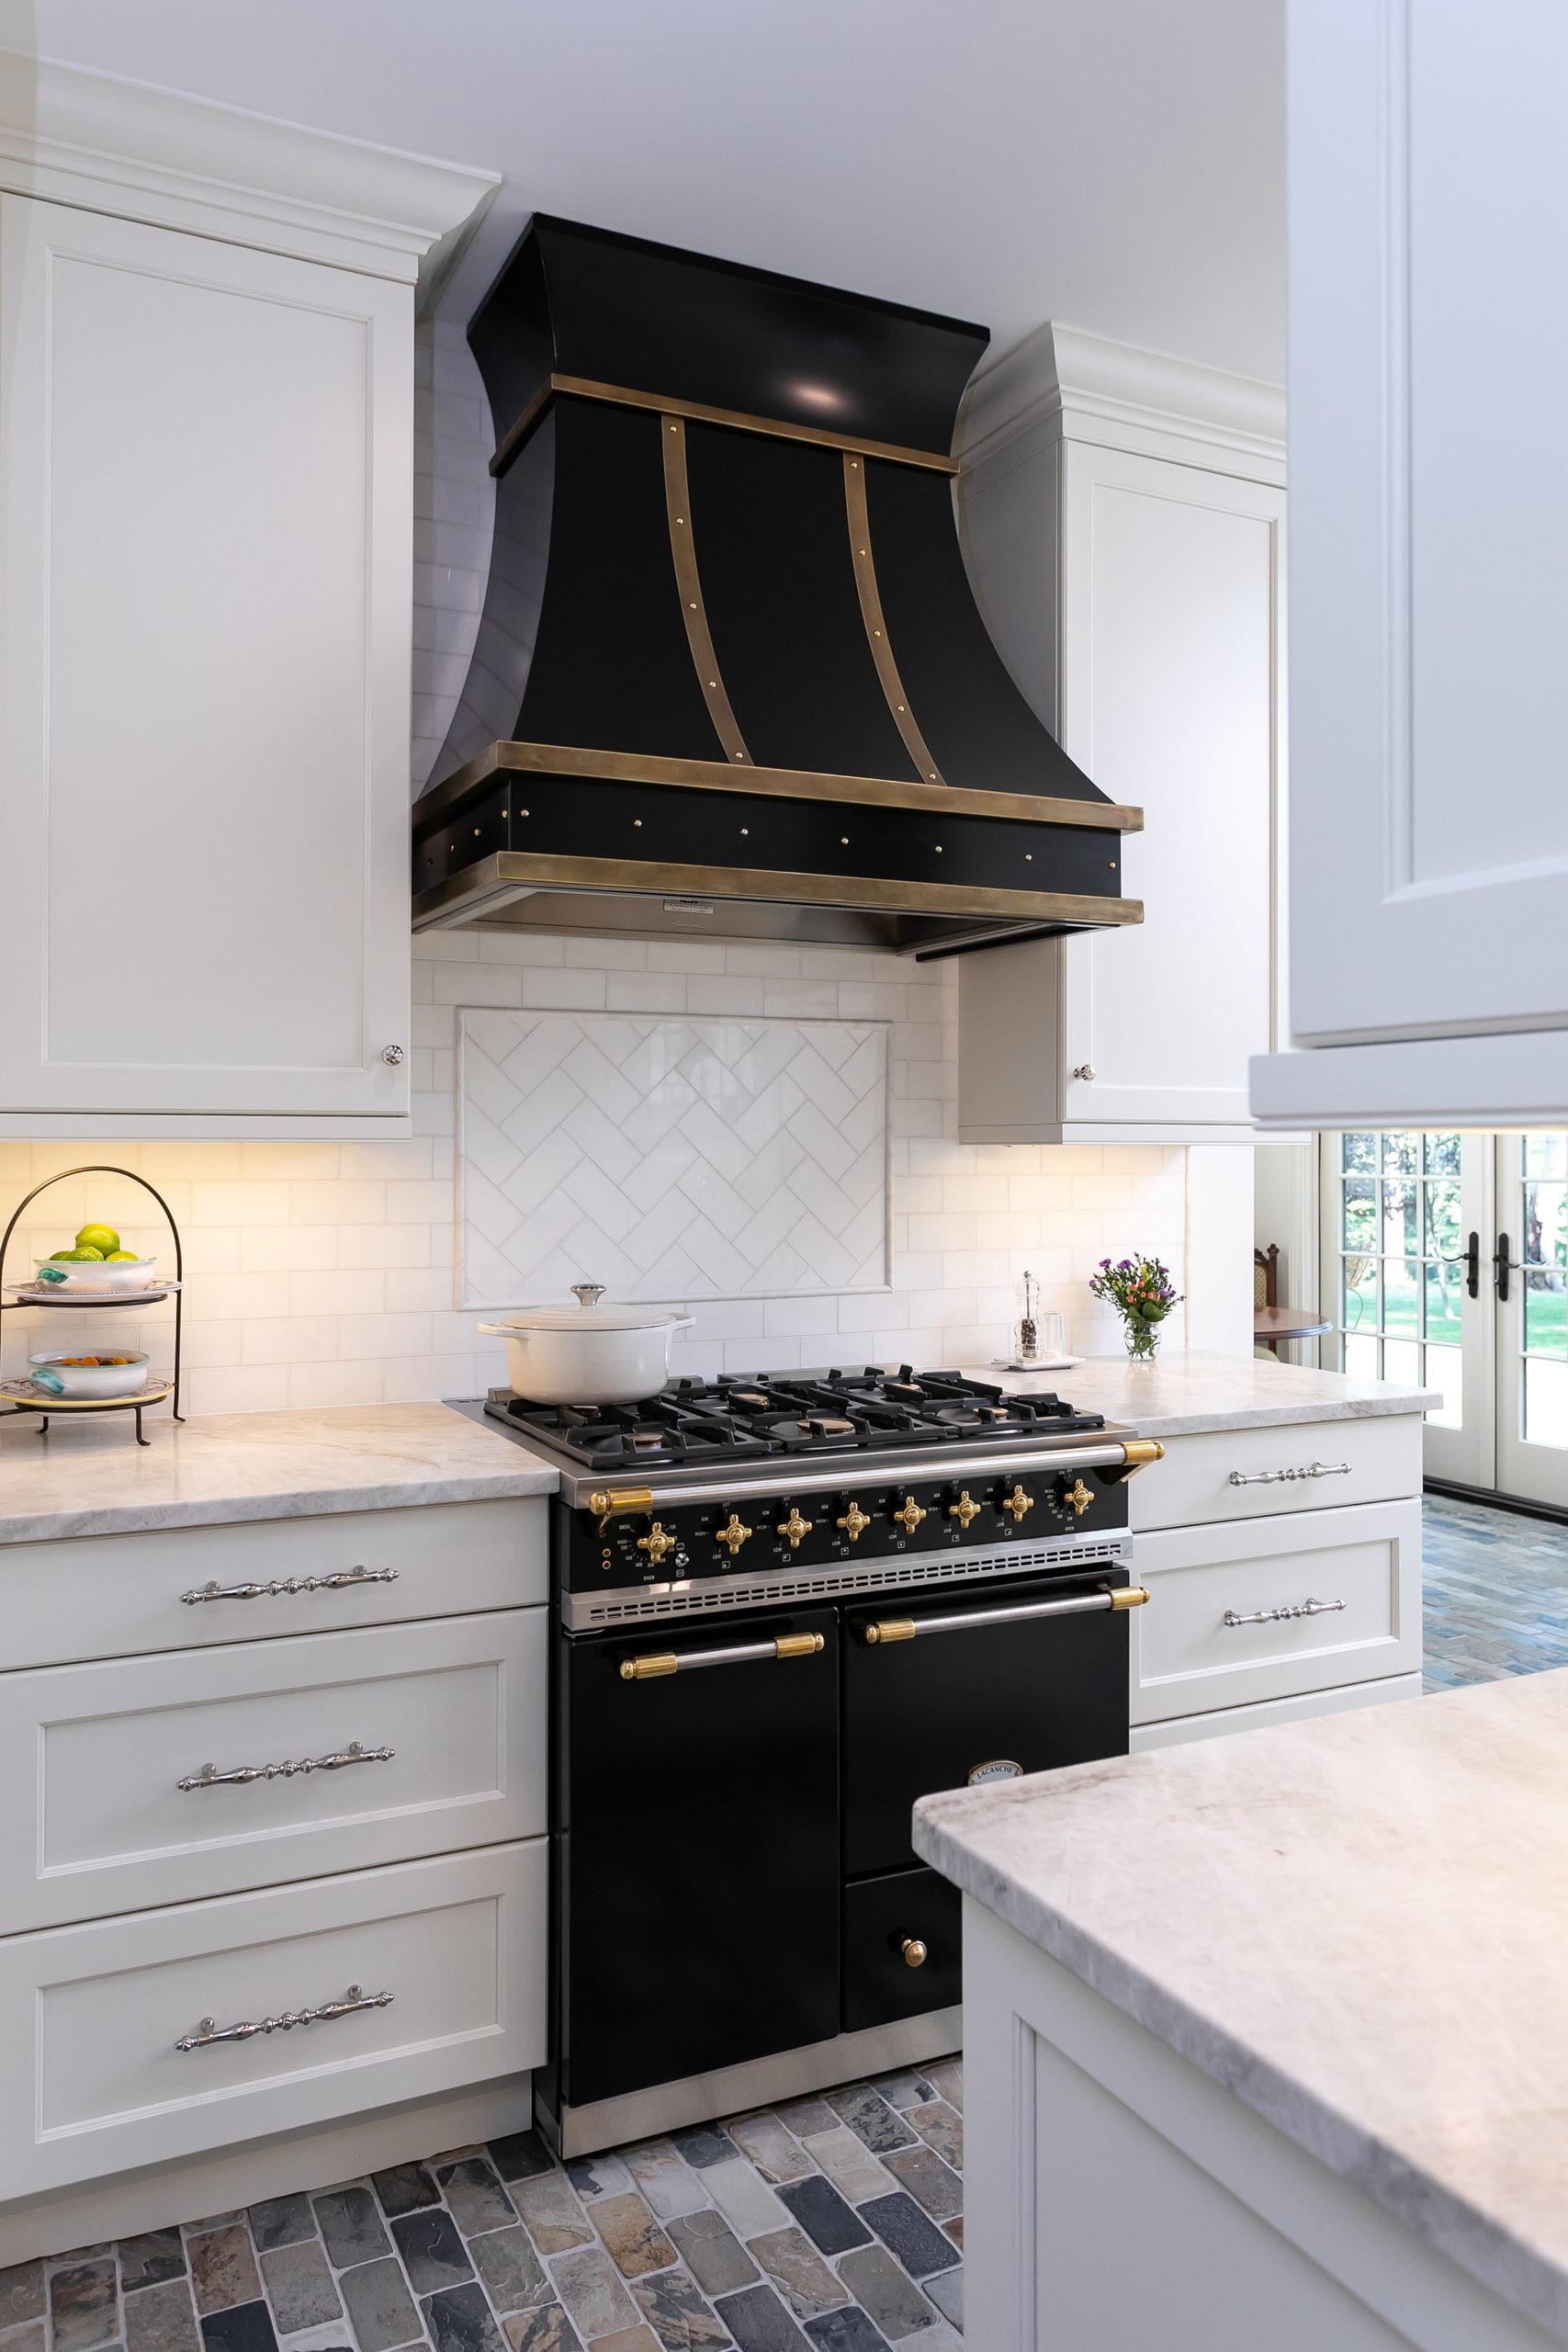 Kitchen Remodeling Services near me in Raleigh NC